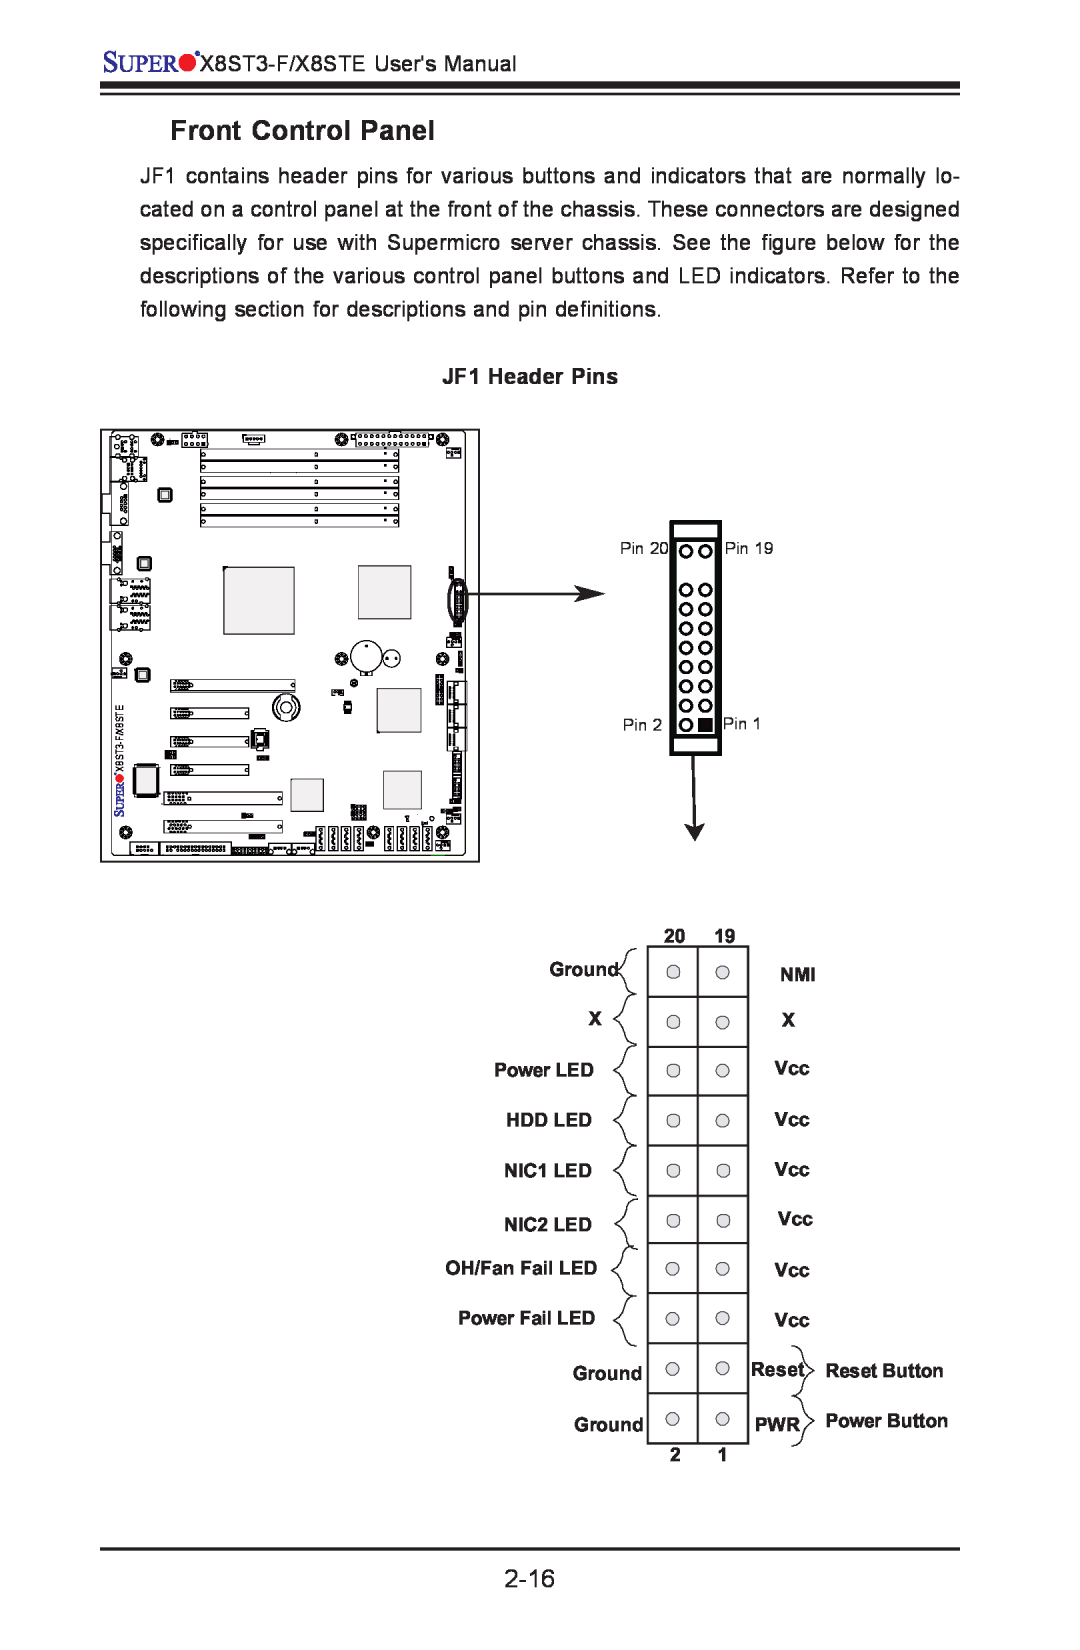 SUPER MICRO Computer X8ST3-F, X8STE user manual Front Control Panel, 2-16, JF1 Header Pins 